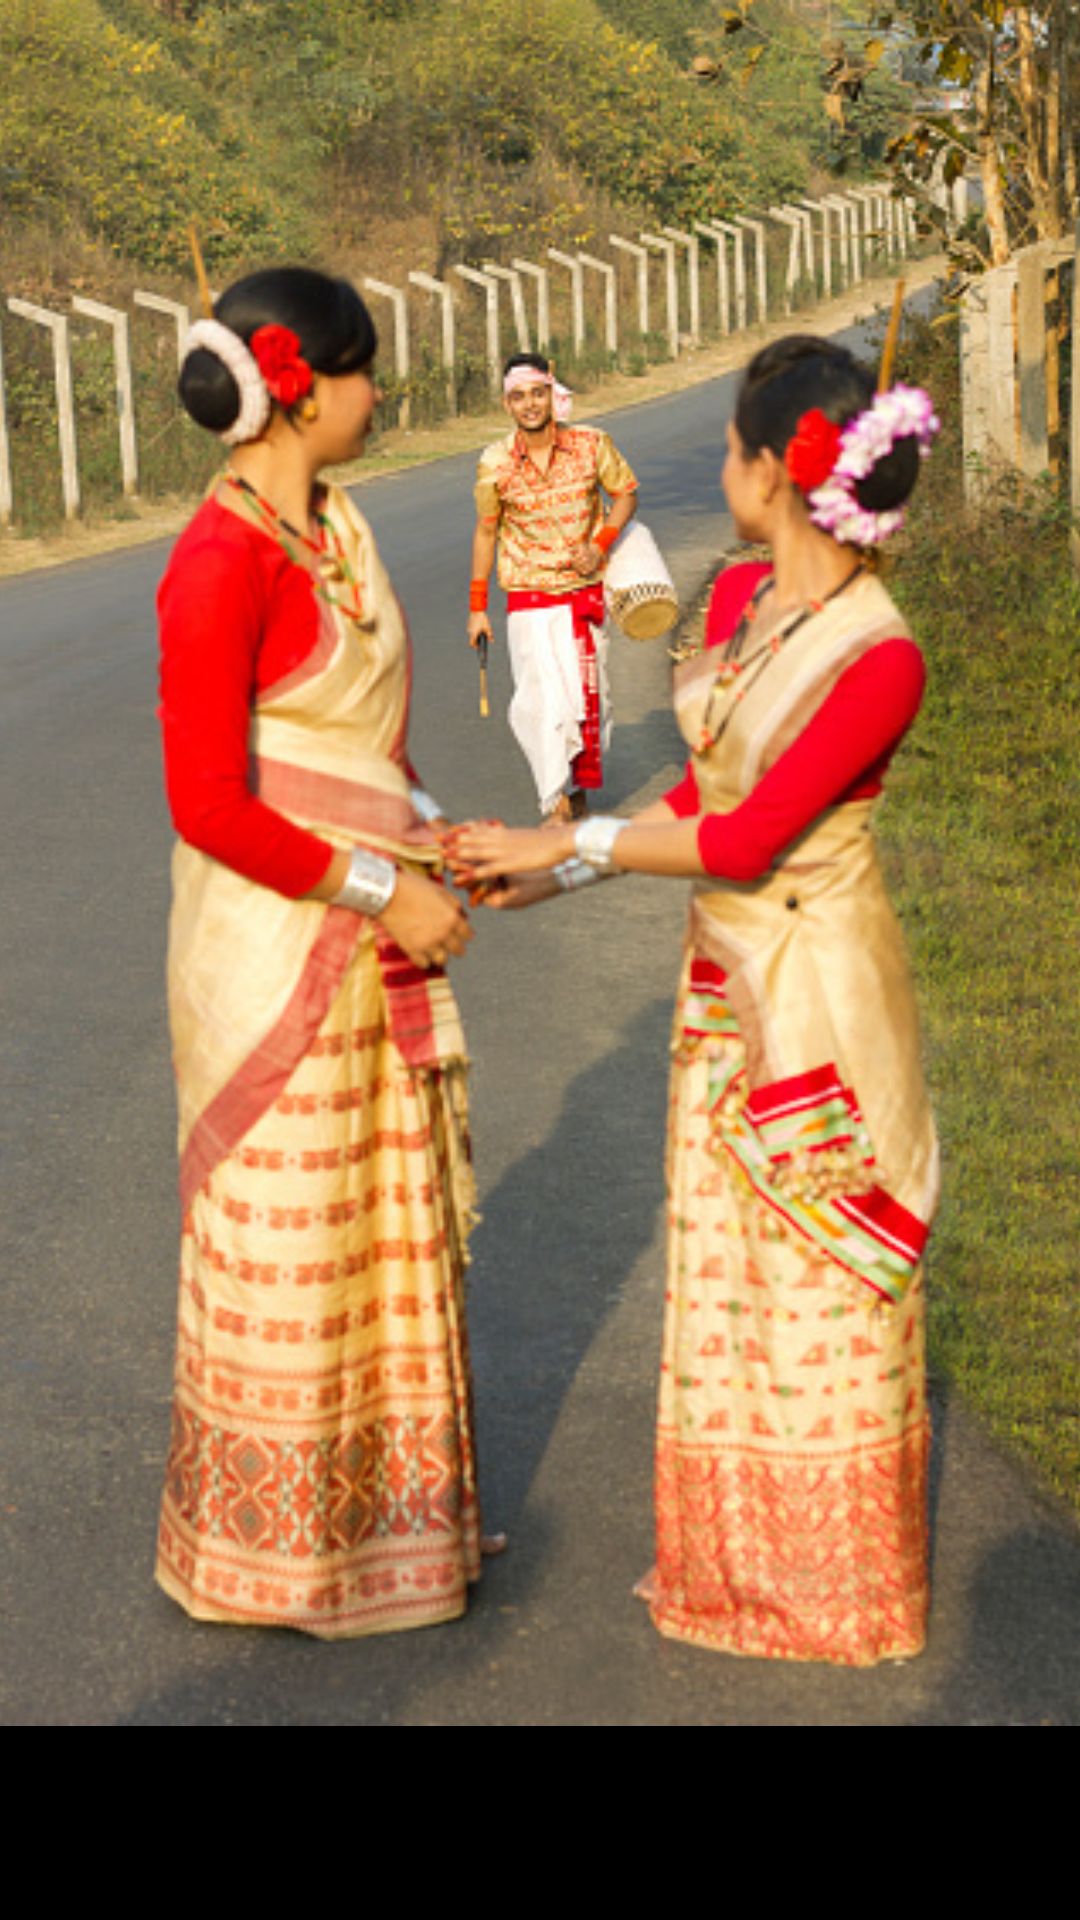 Visit Rongali fest to experience the rich culture of Assam | India.com